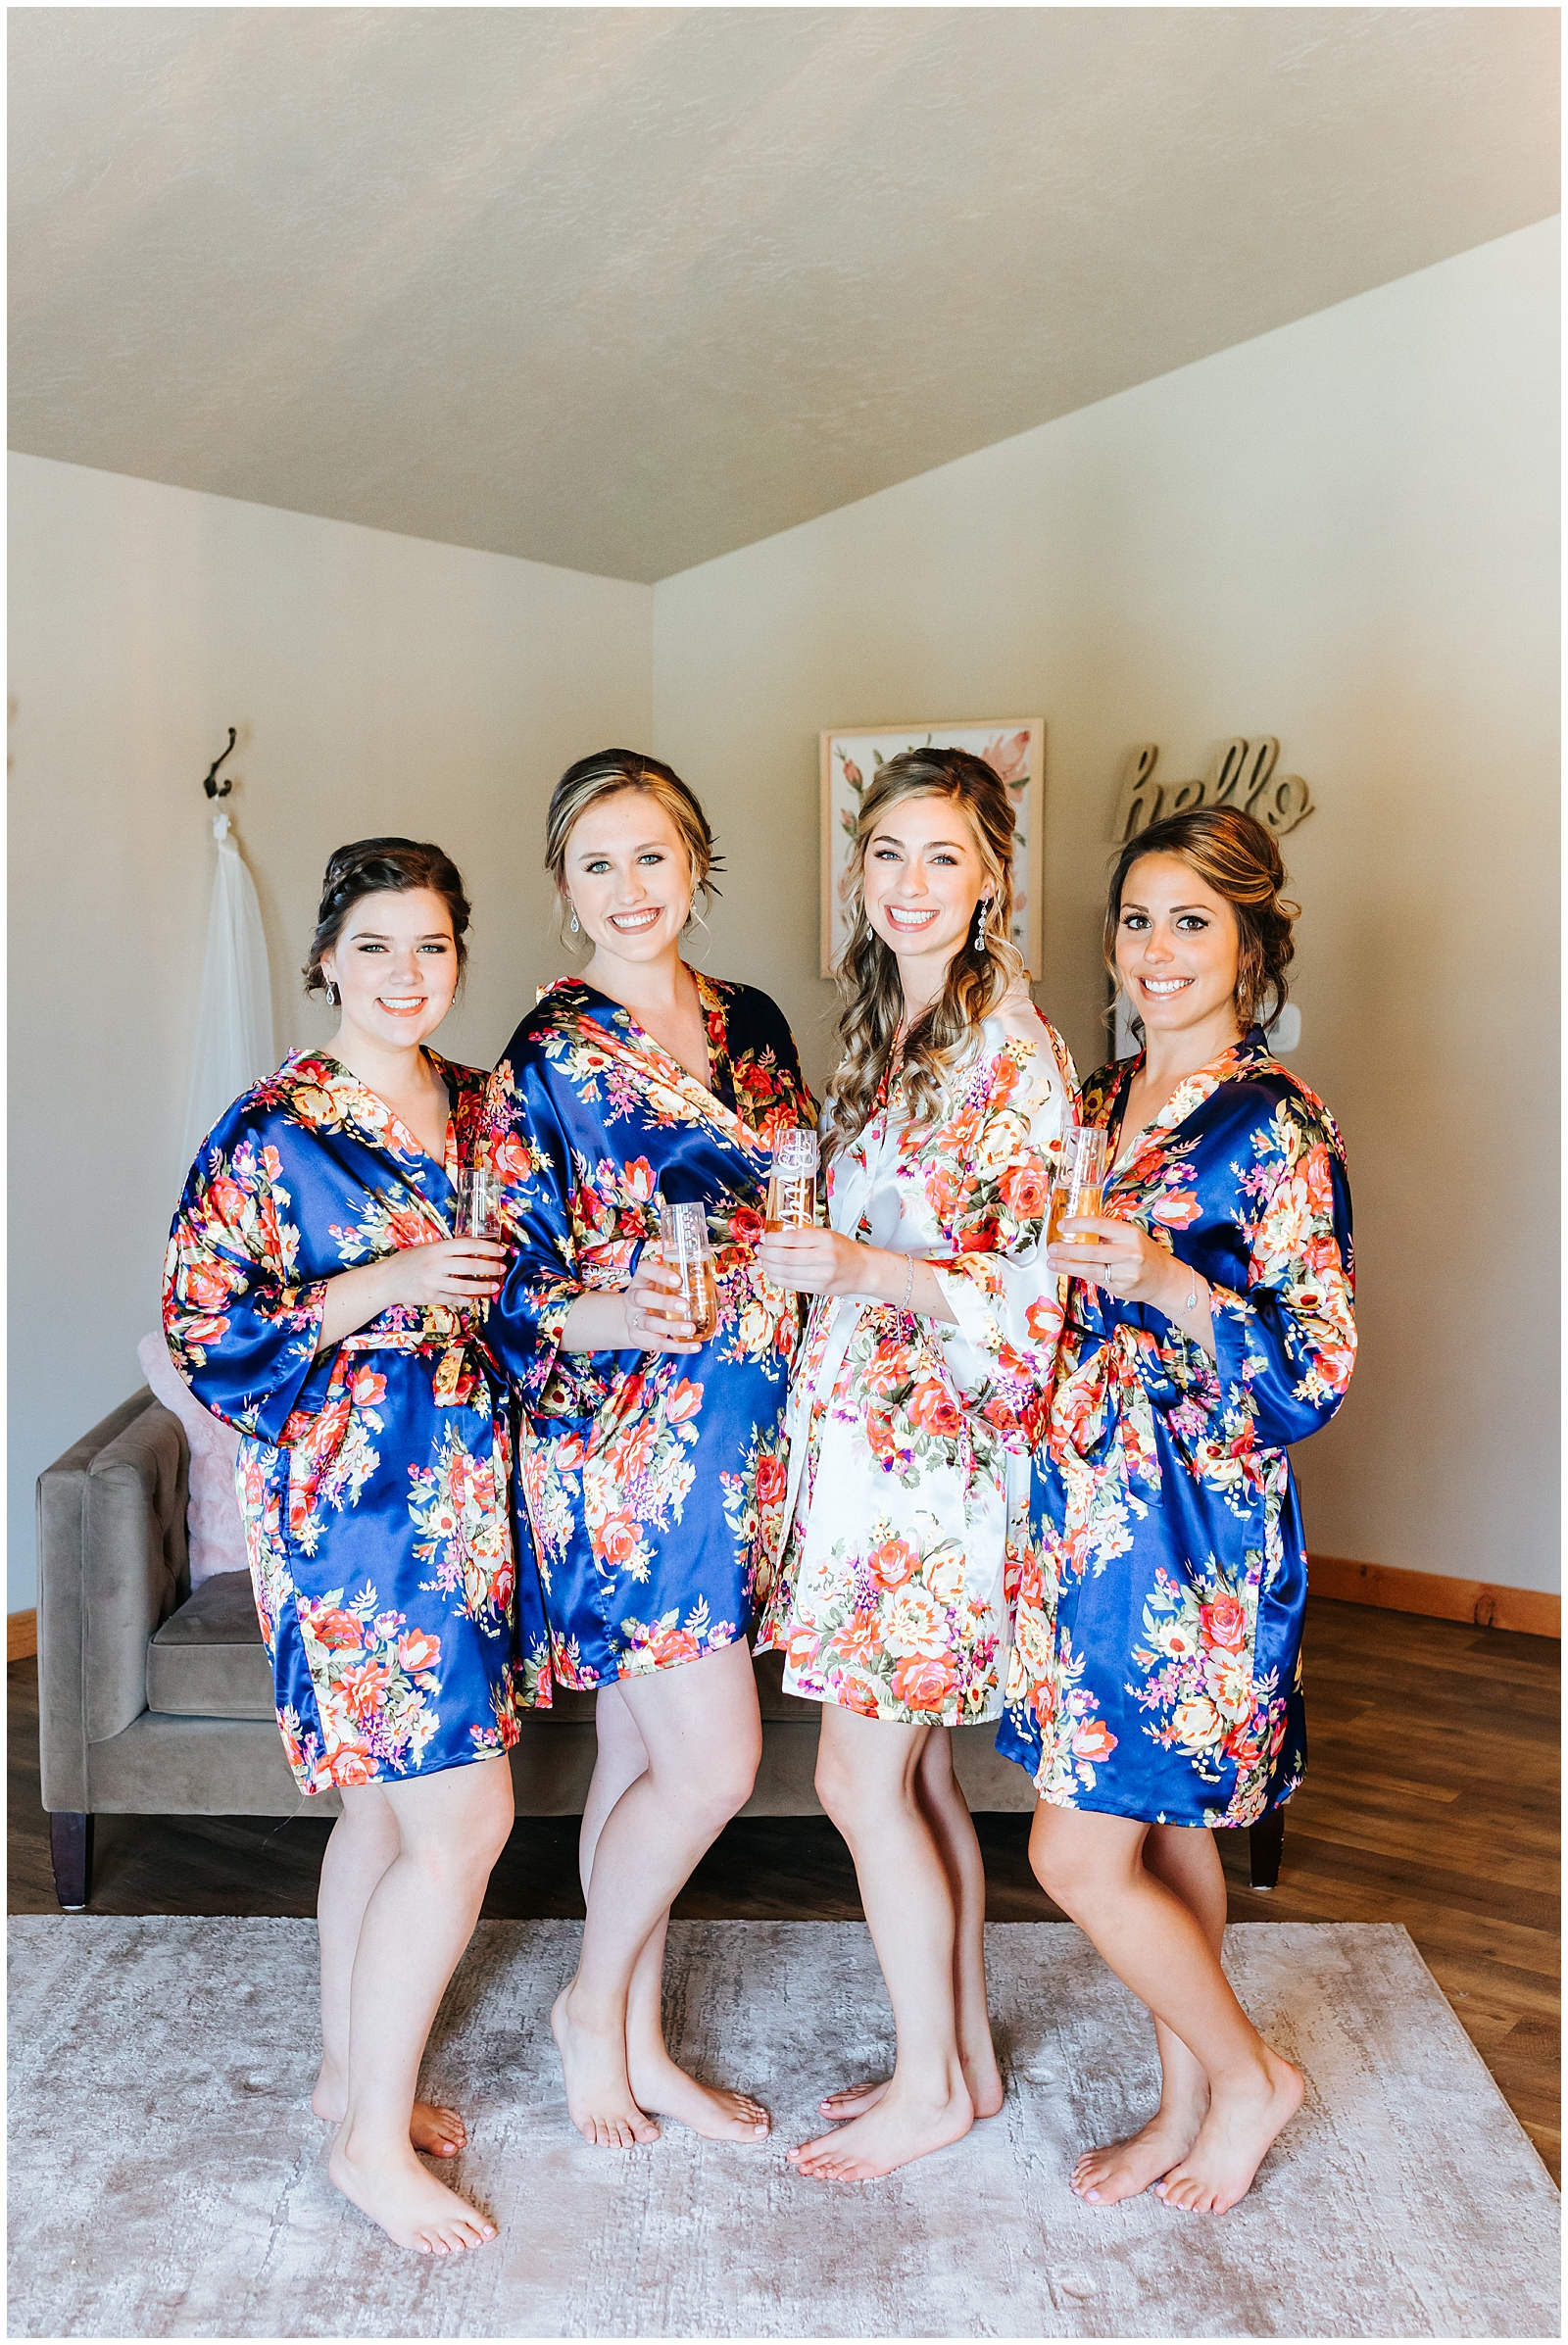 Bridesmaids Getting Ready in Floral Robes before Wedding Ceremony